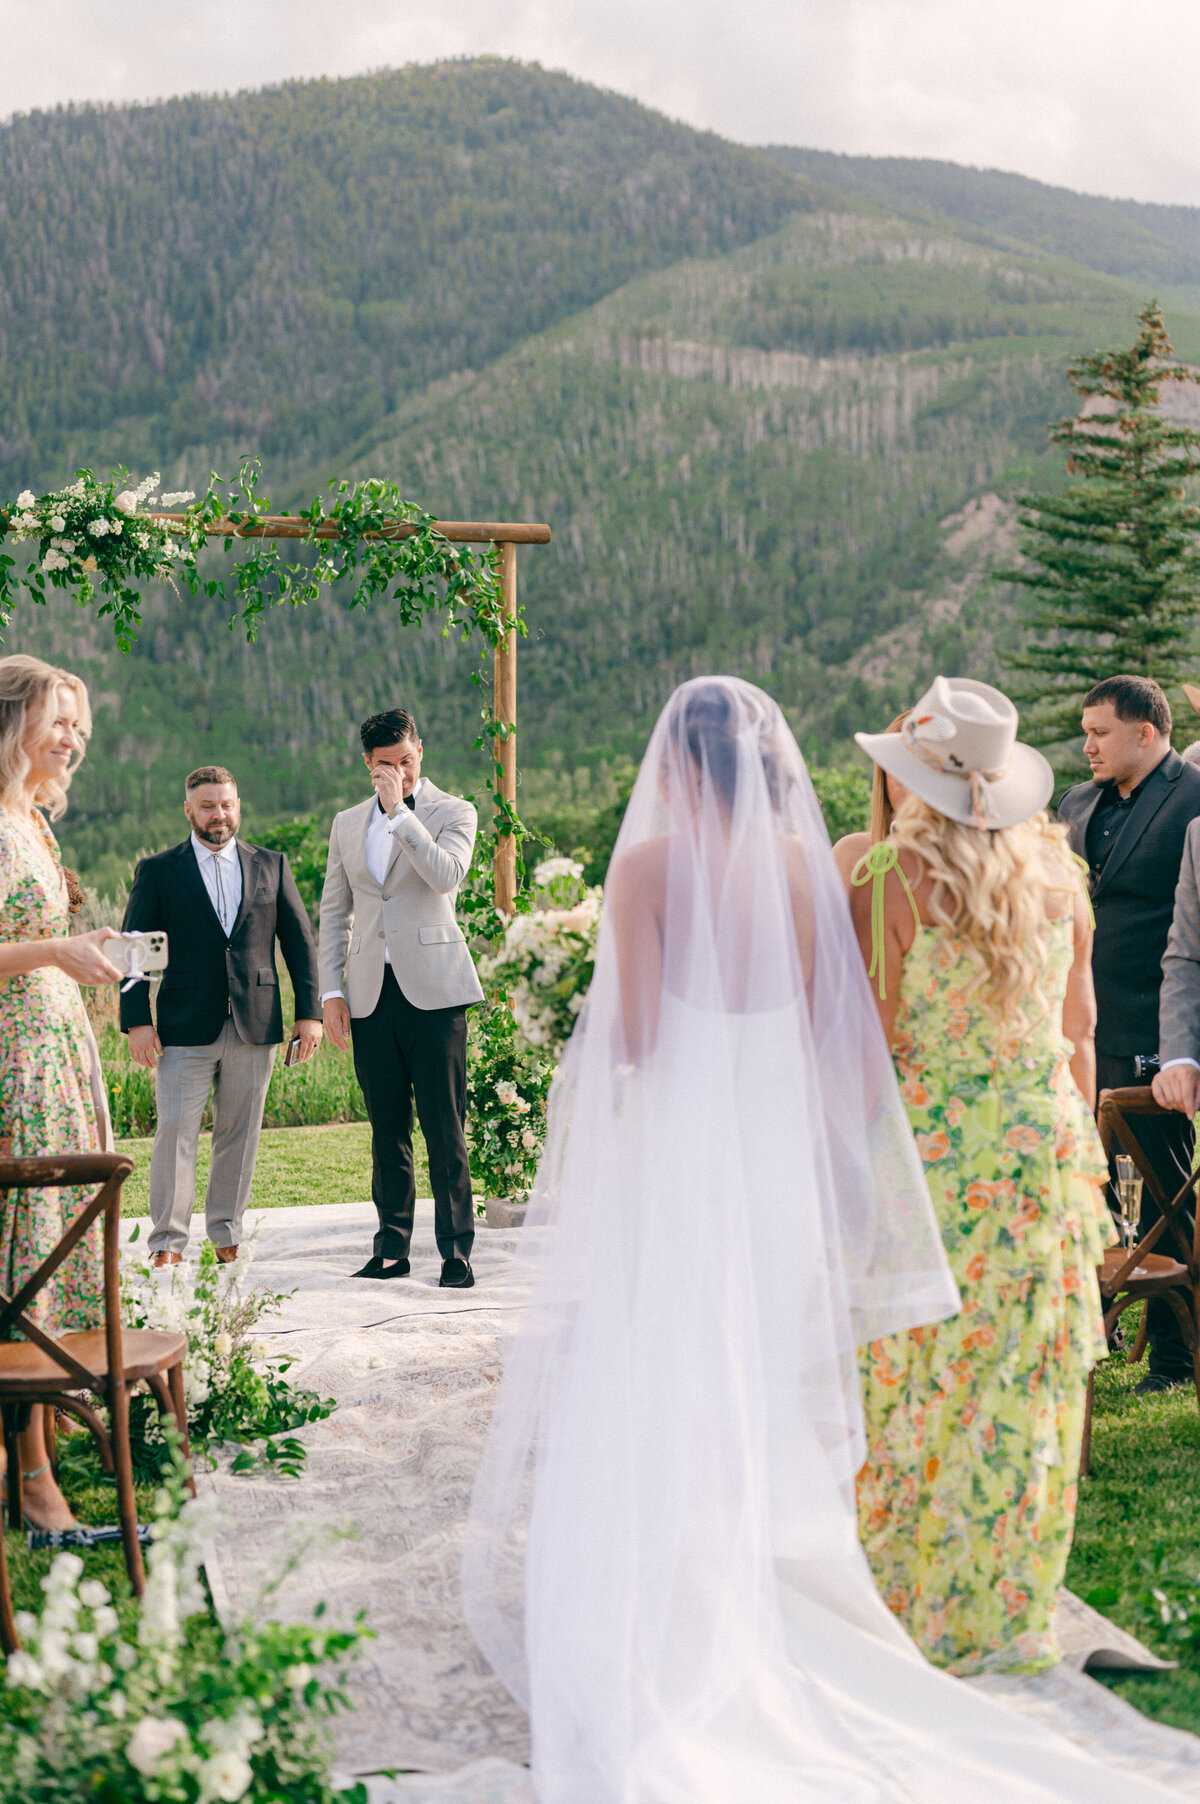 Lia-Ross-Aspen-Snowmass-Patak-Ranch-Wedding-Photography-By-Jacie-Marguerite-350